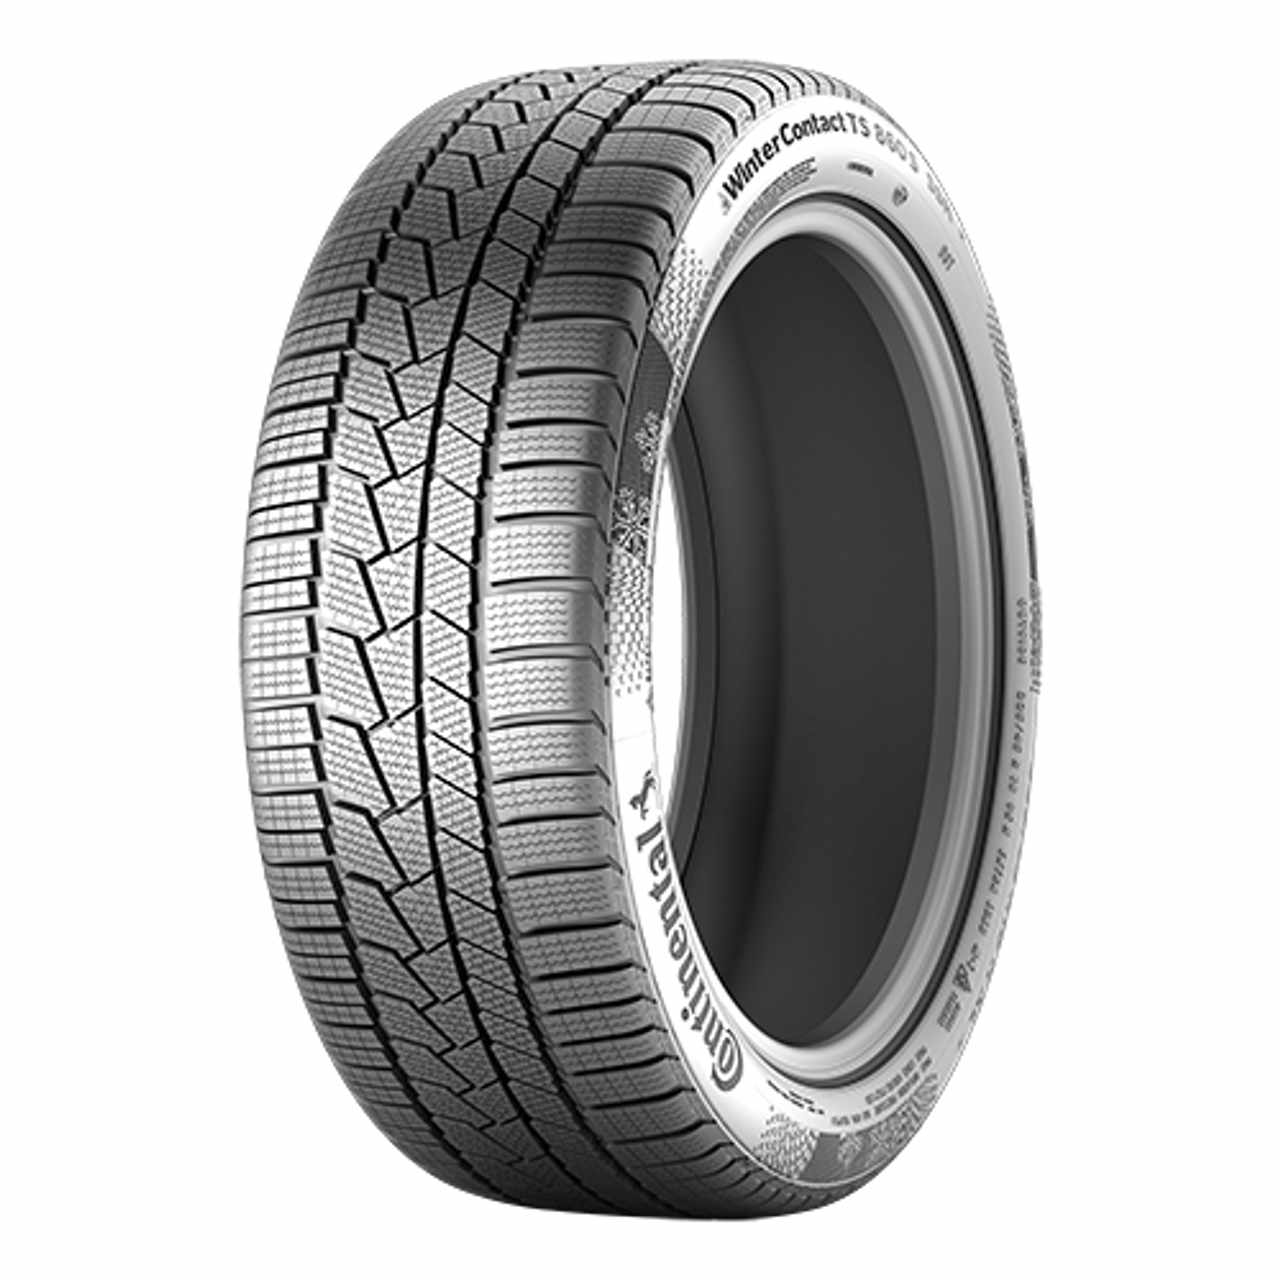 CONTINENTAL WINTERCONTACT TS 860 S (*) (EVc) SSR 225/45R17 91H BSW